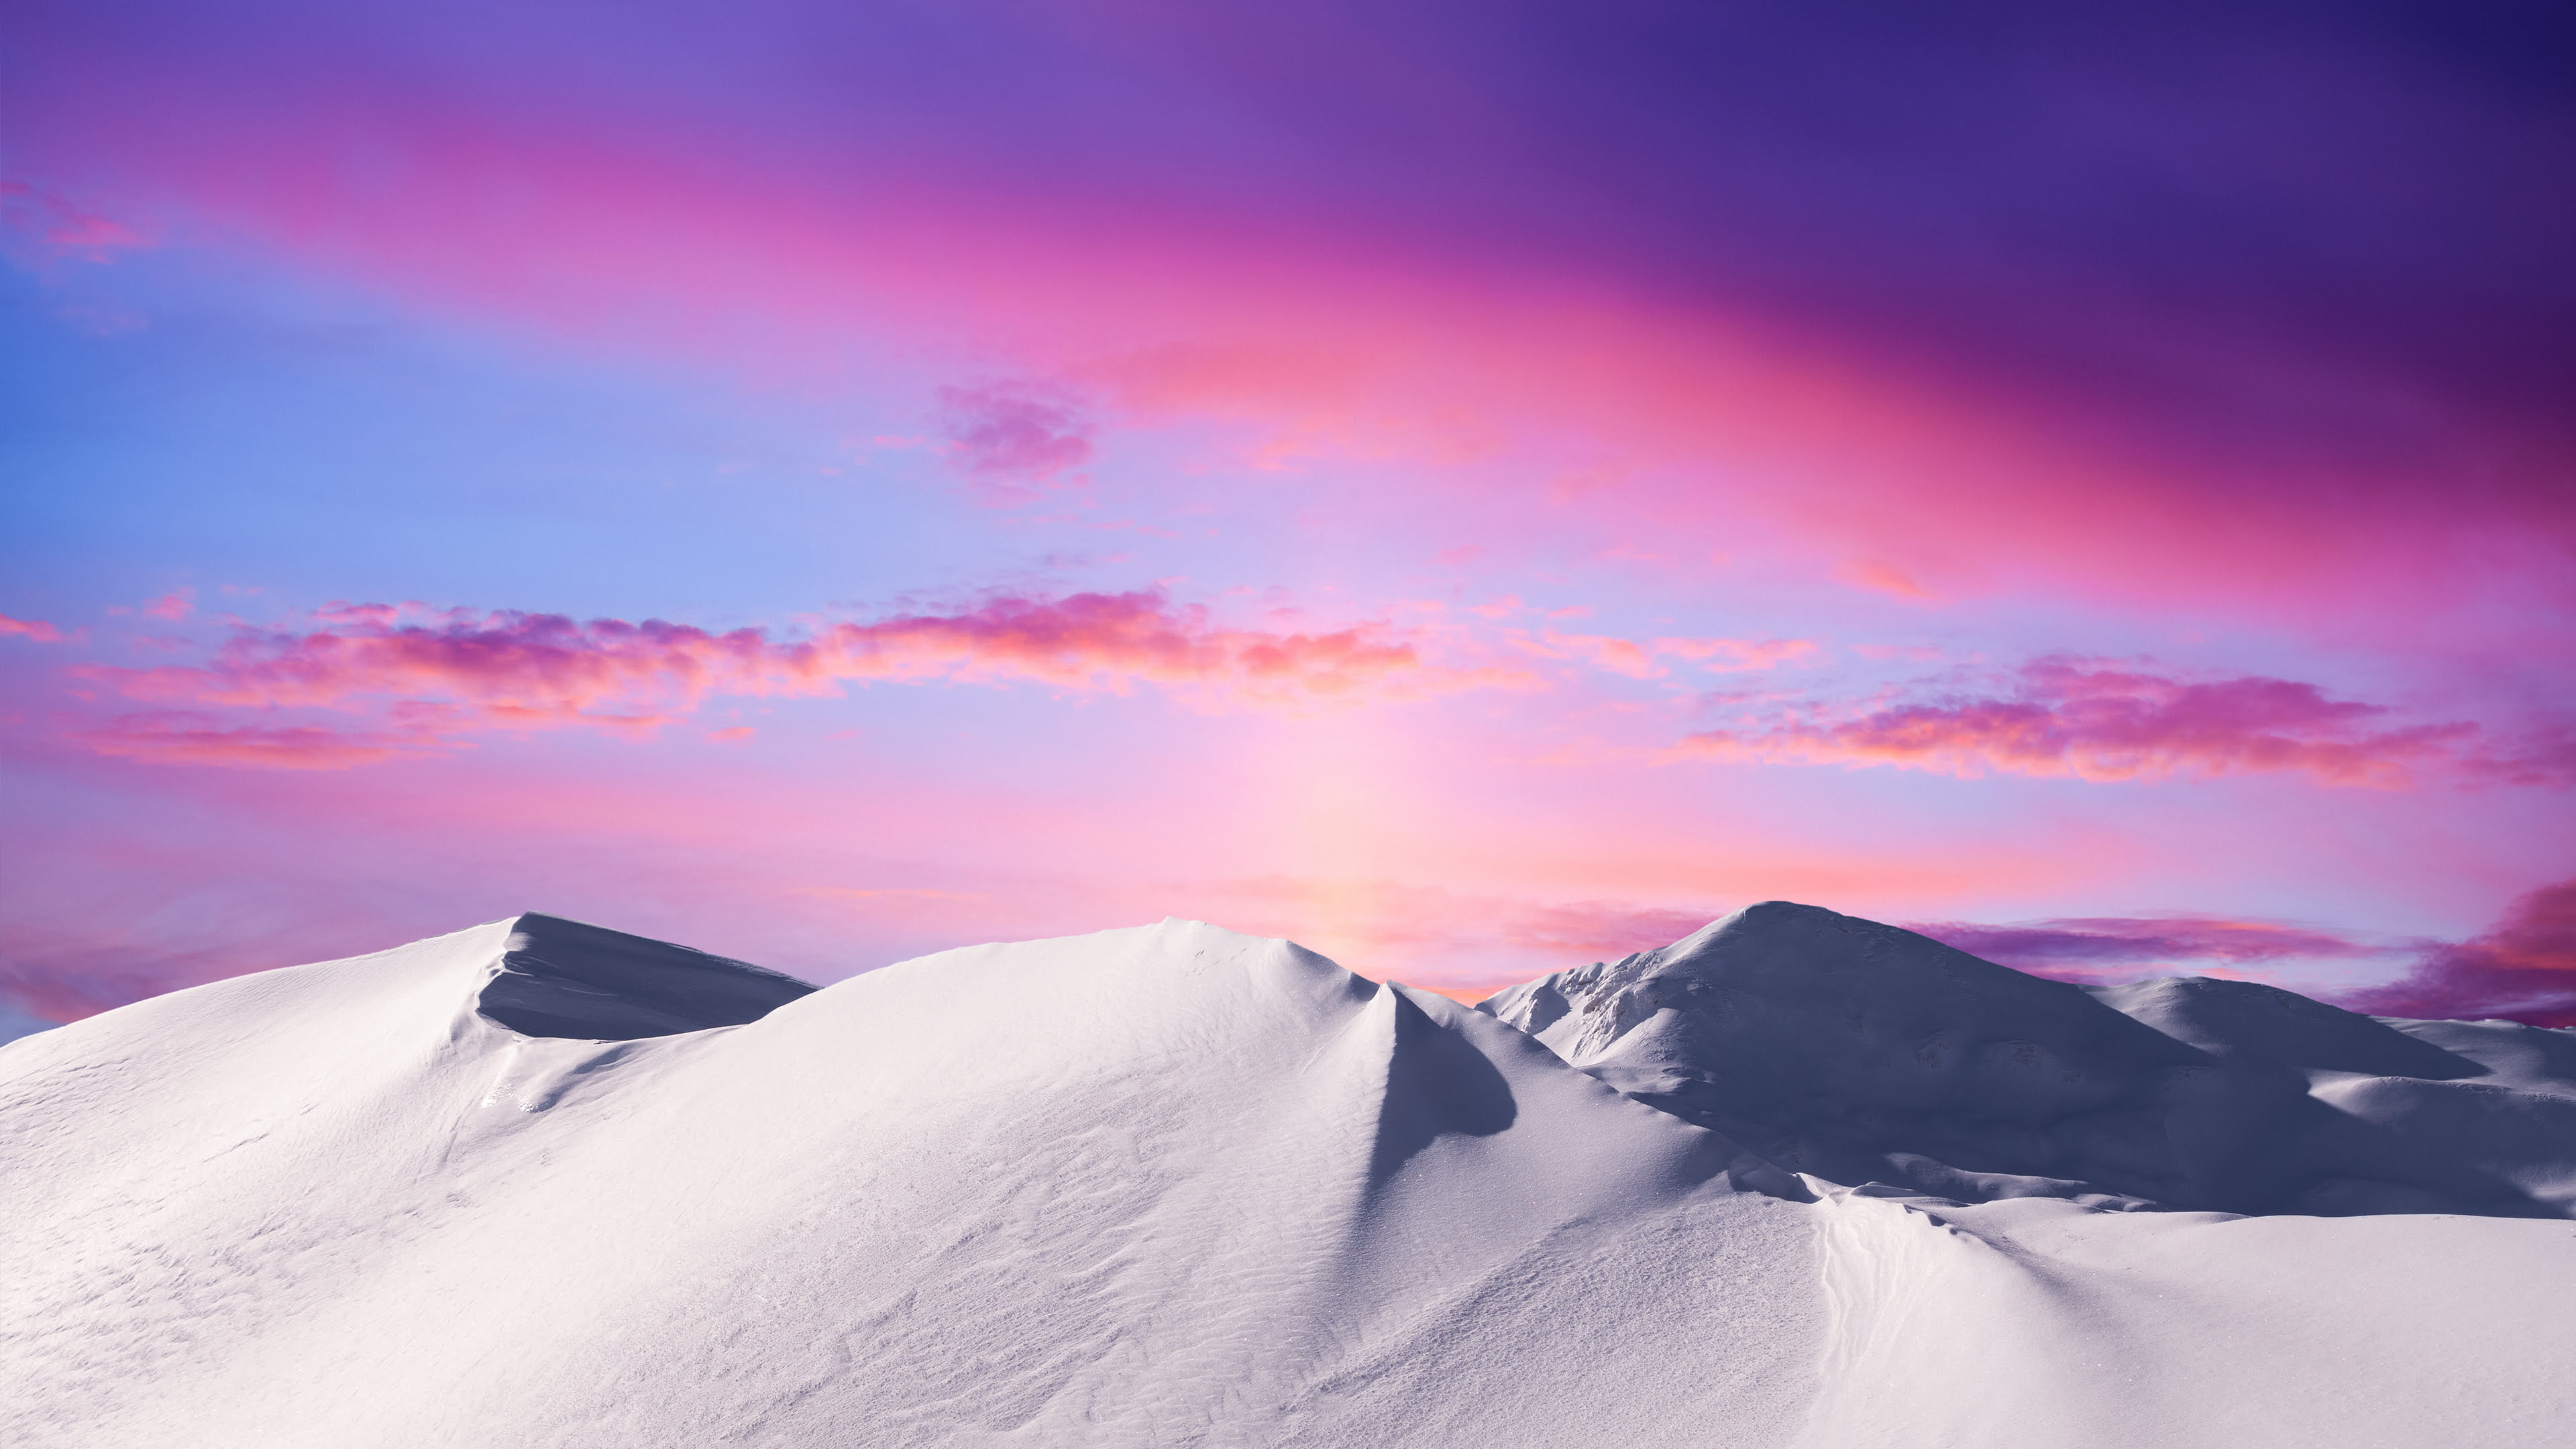 Download A Purple And Blue Background With A Mountain And Mountains